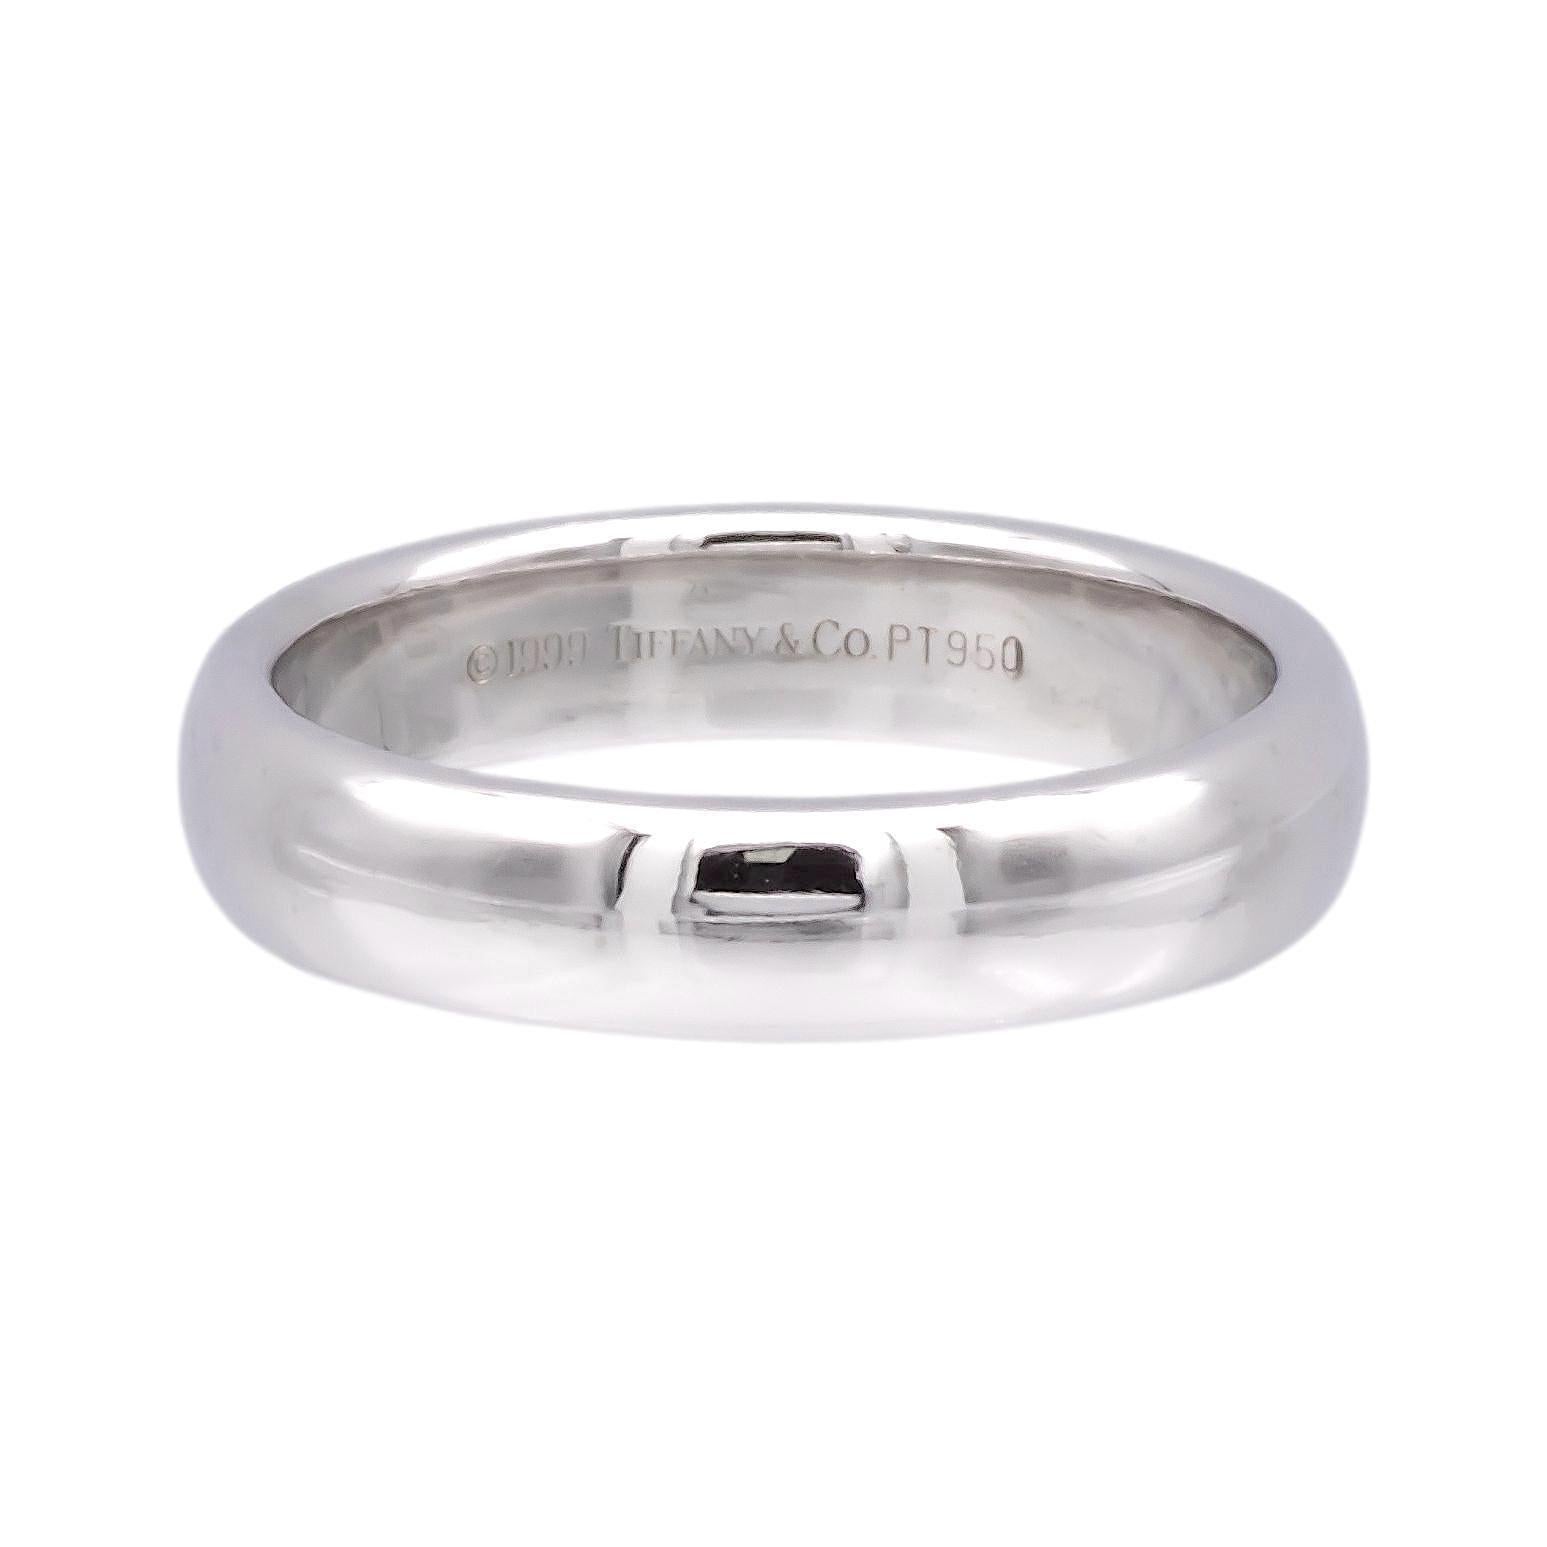 Tiffany & Co. Classic wedding band ring from the Forever collection finely crafted in platinum. Made in 1999. Fully hallmarked with logo and metal content.

Ring Specifications
Brand: Tiffany & Co.
Style: Forever (comfort-fit)
Hallmarks: © 1999